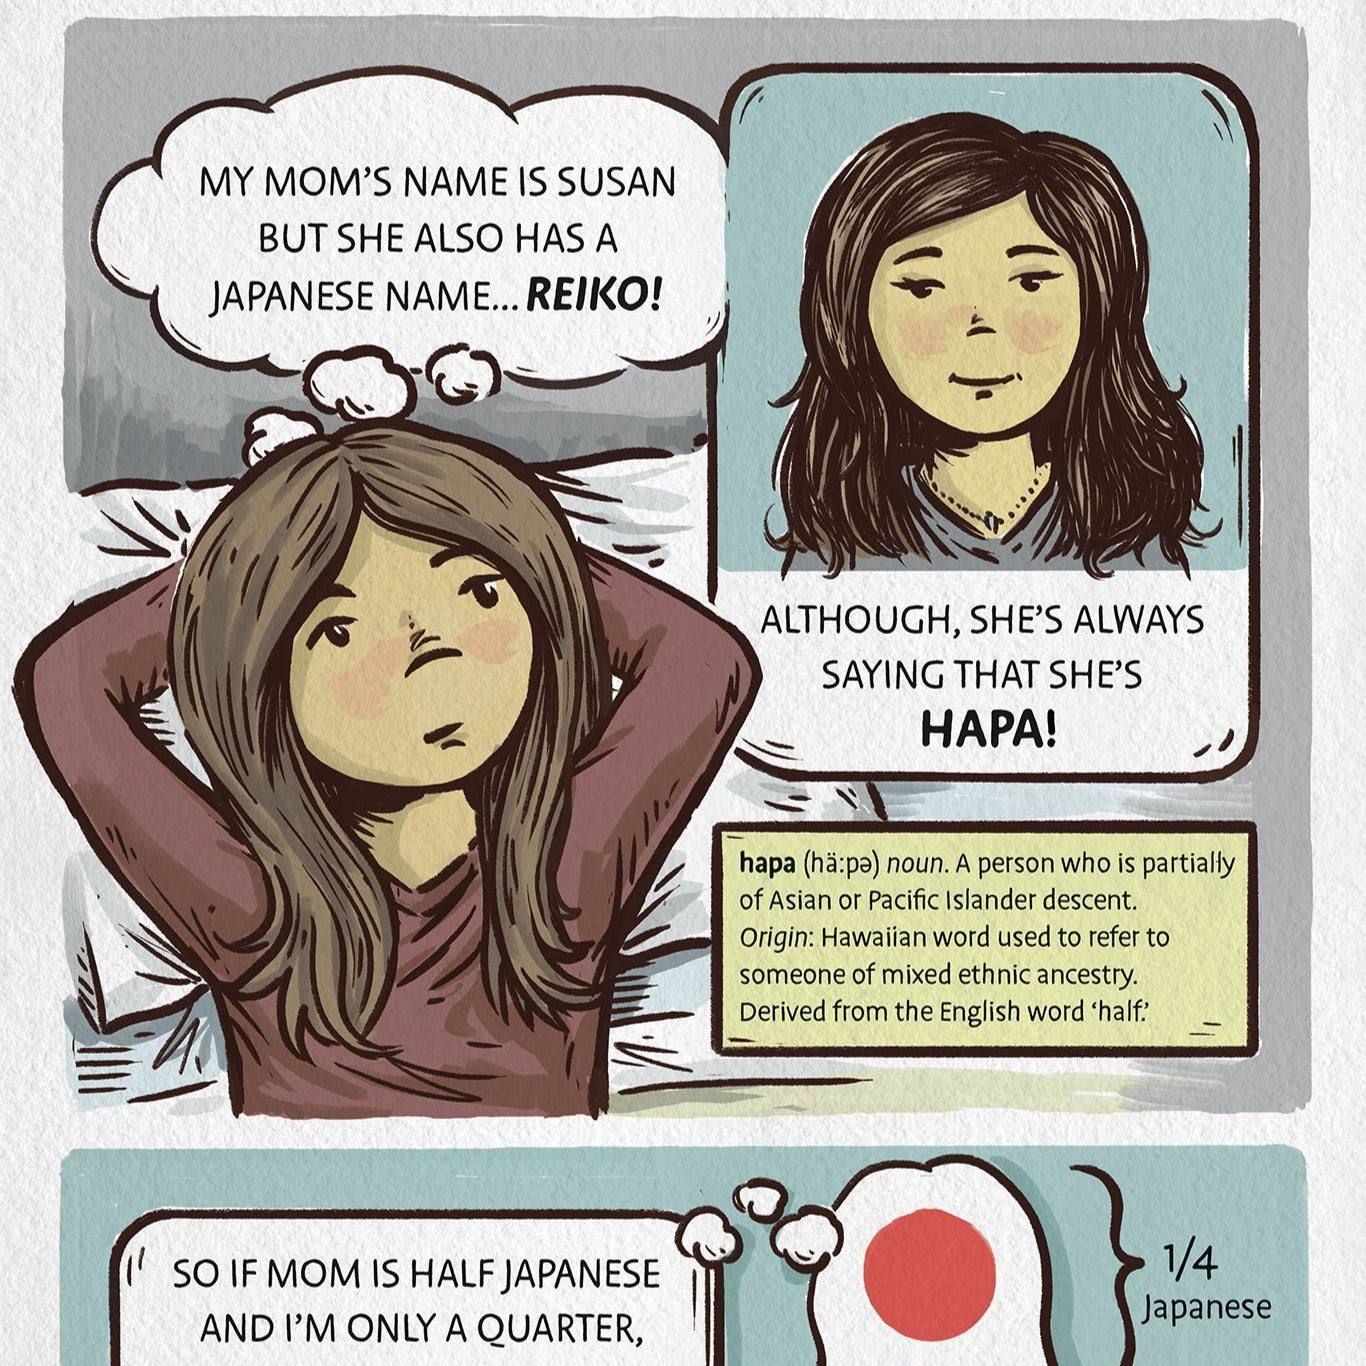 On Being Yuko : a graphic novel